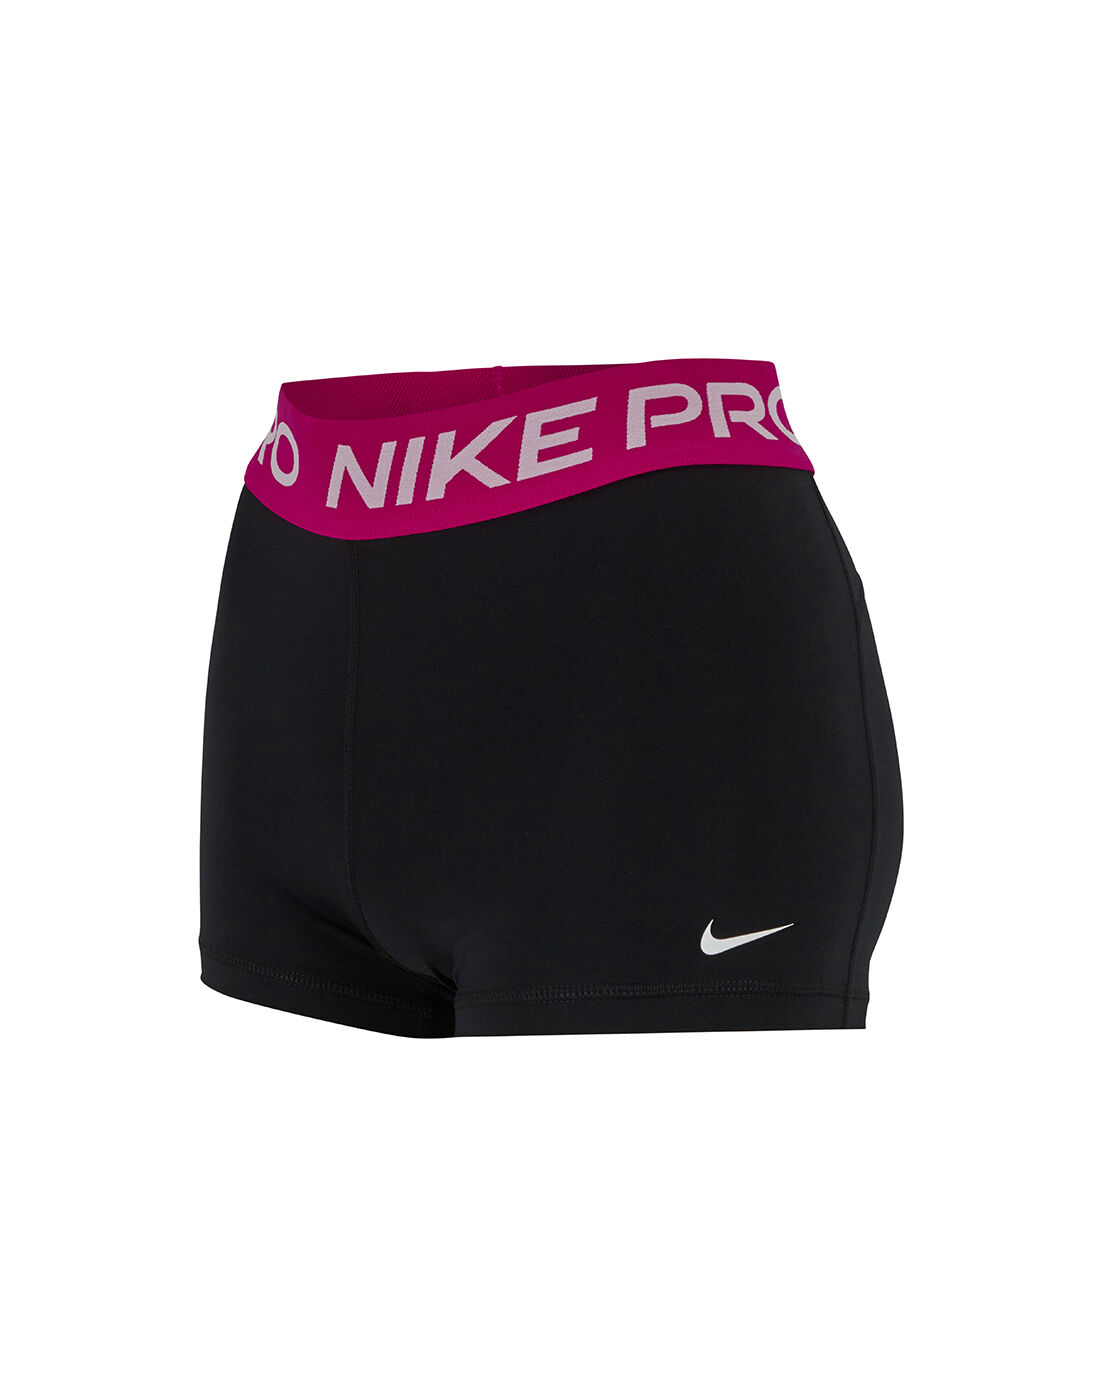 nike outlet shorts womens